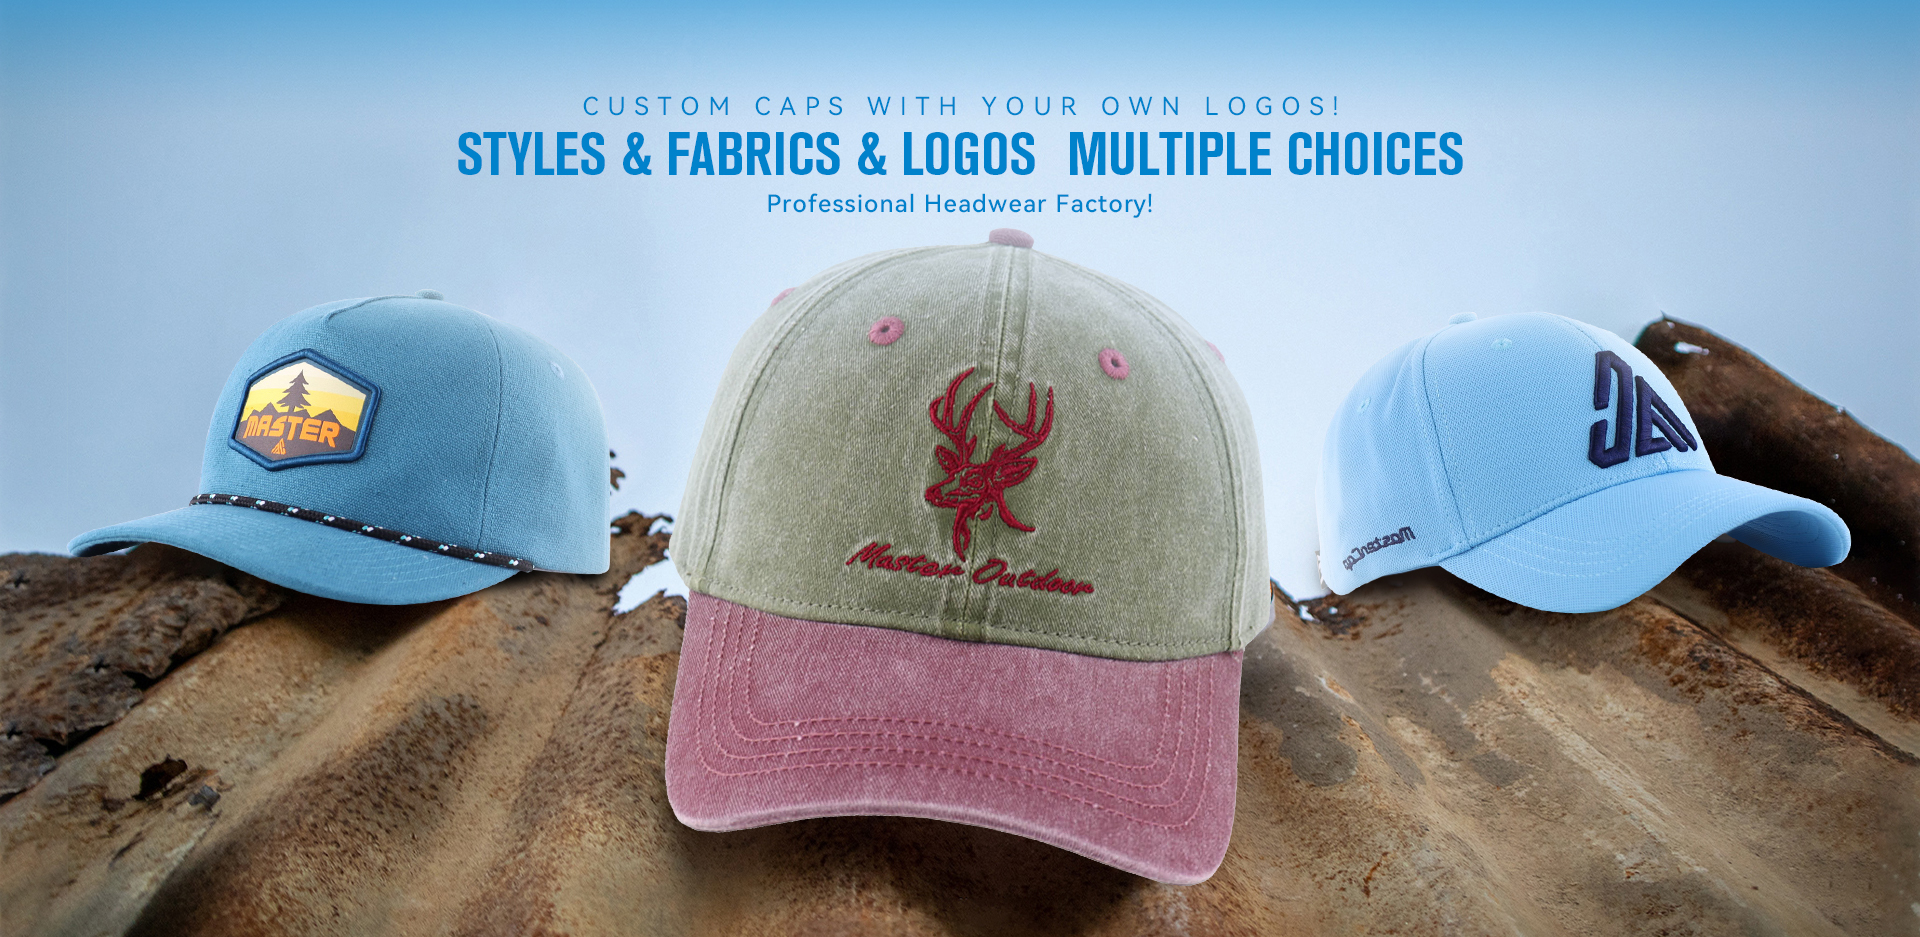 CUSTOM CAPS WITH YOUR OWN LOGOS